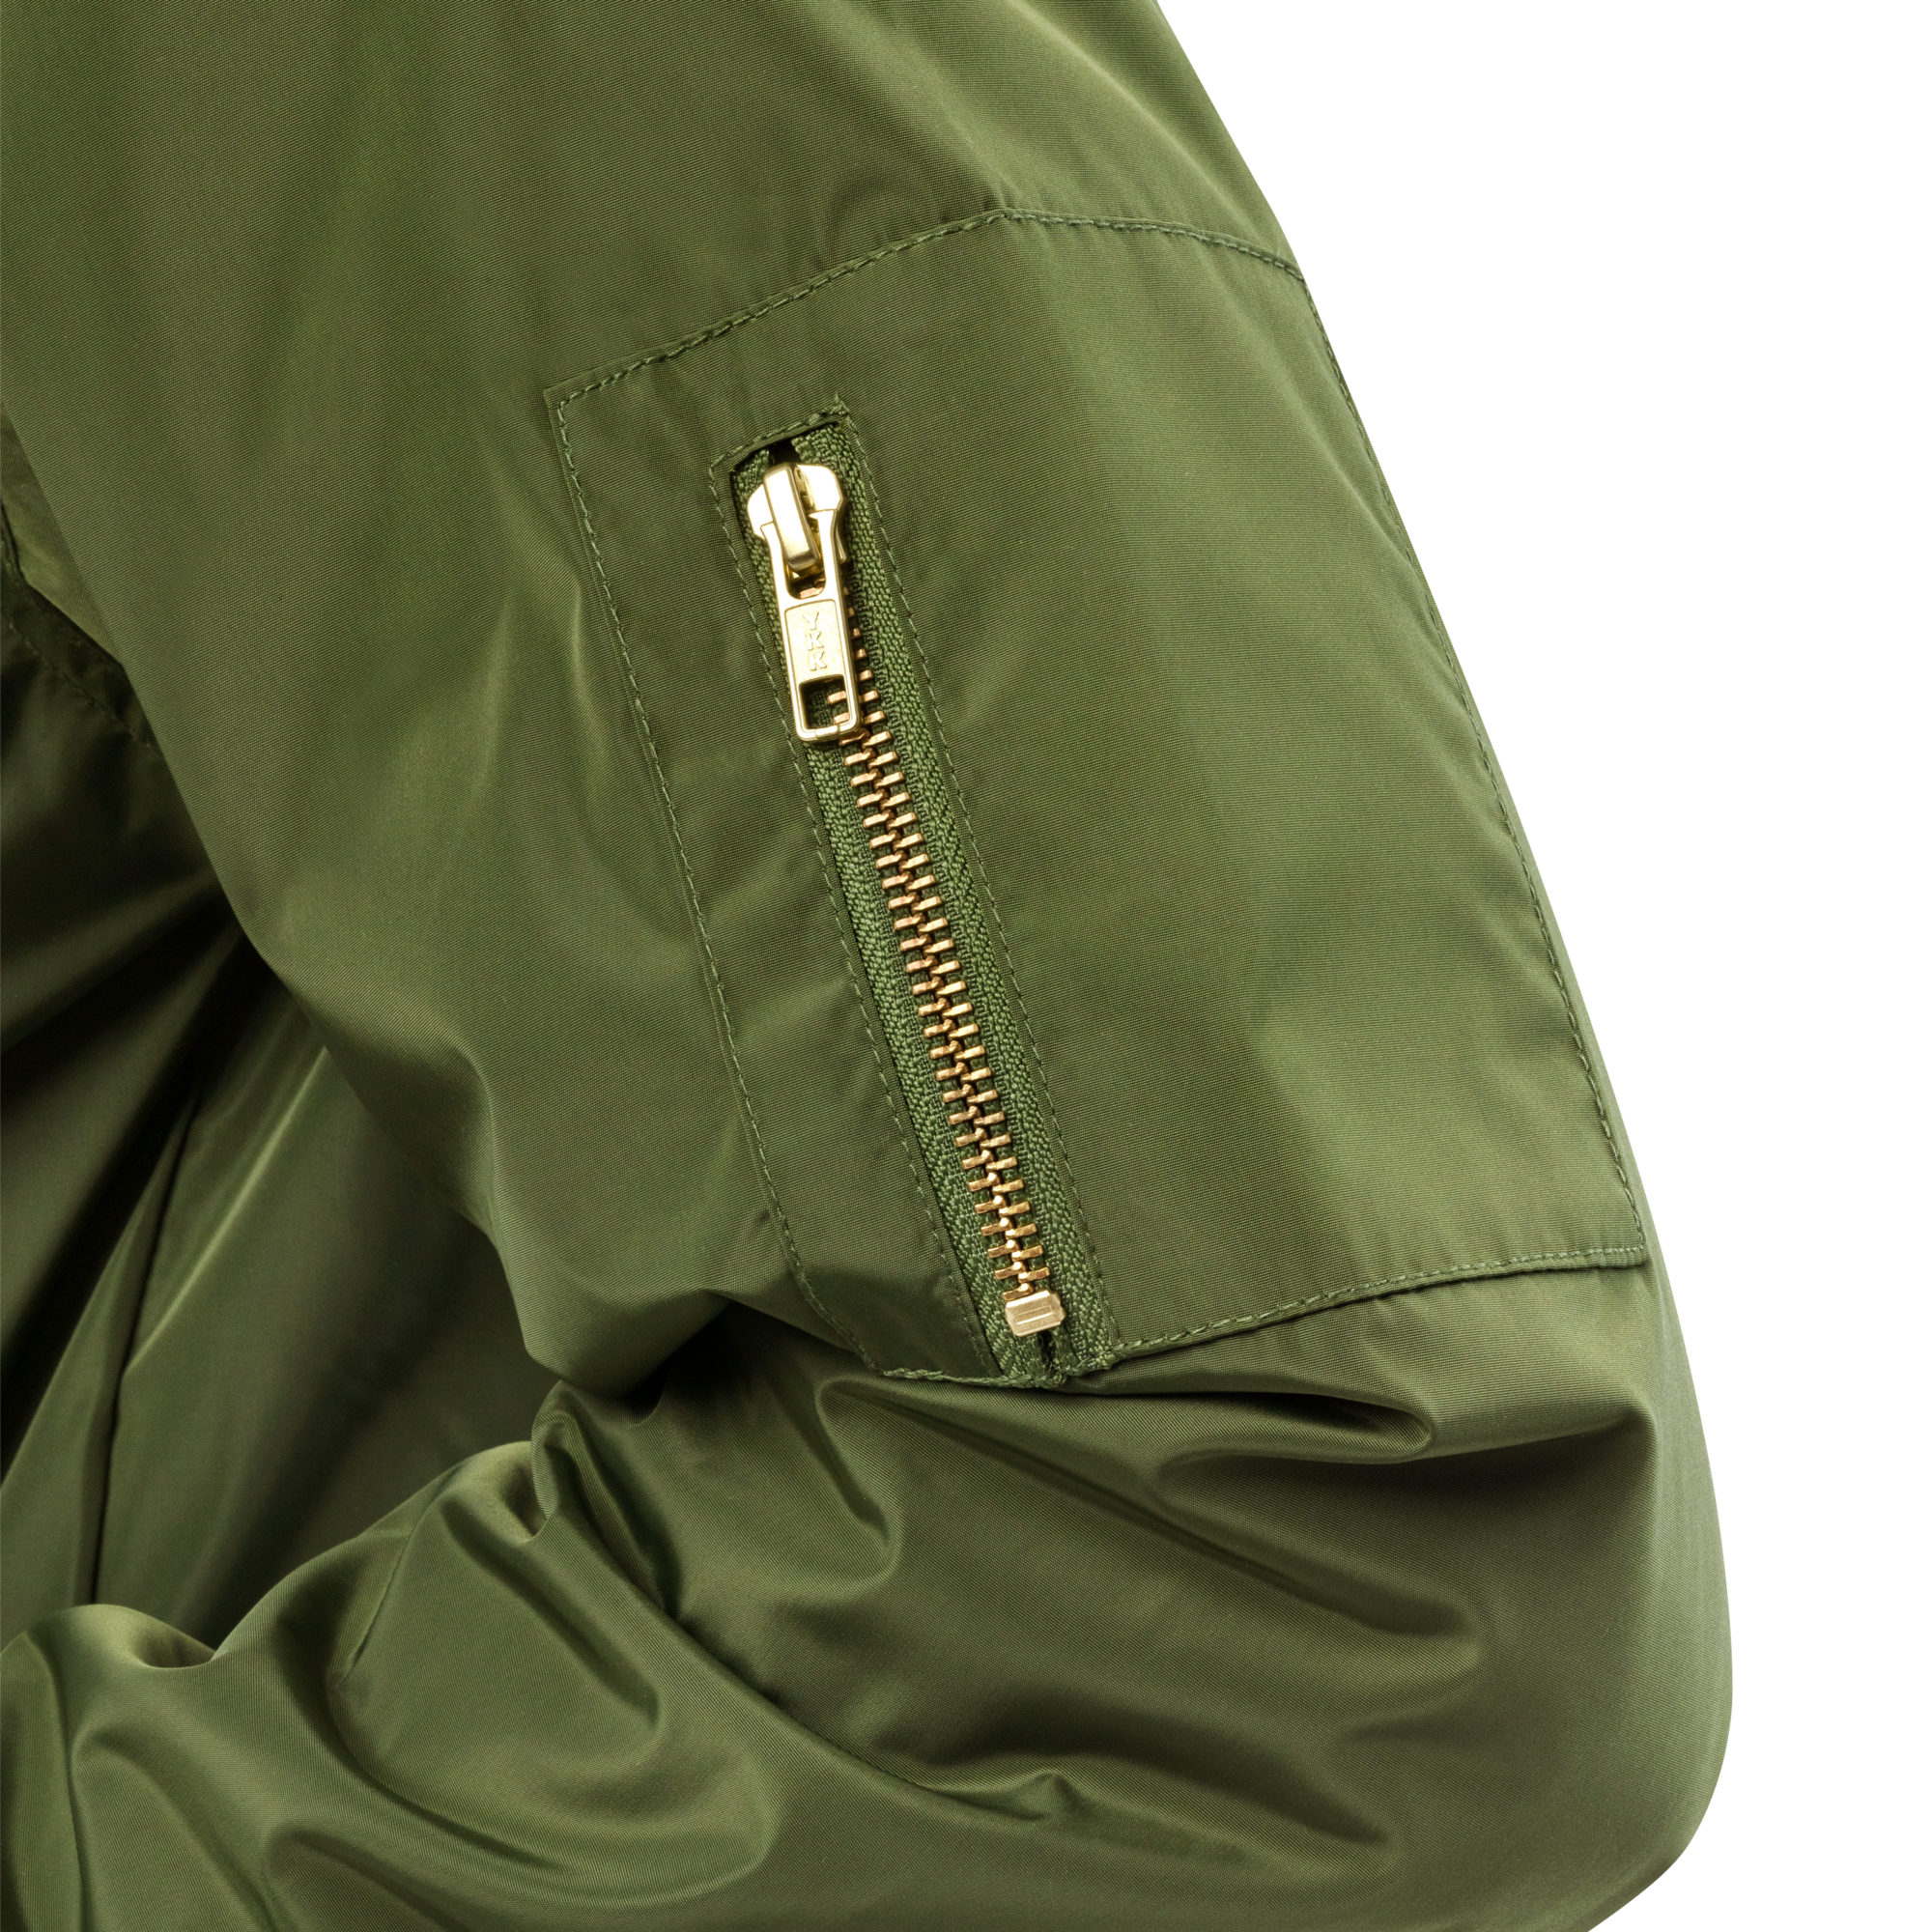 premium-recycled-bomber-jacket-army-front-631a4e7f6aef3.png